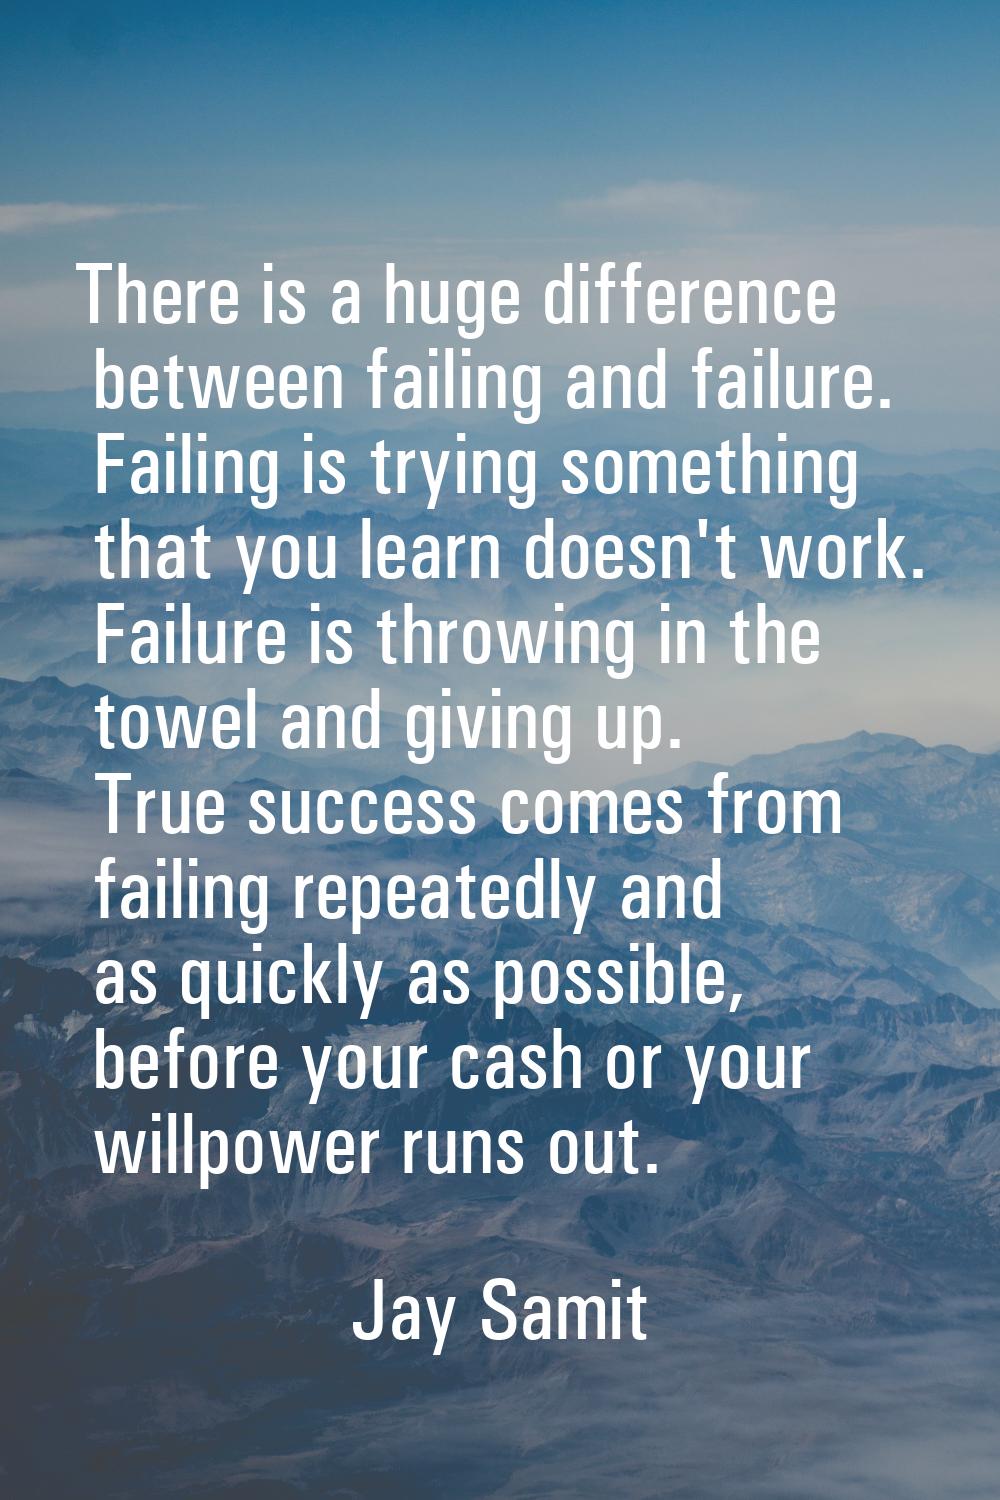 There is a huge difference between failing and failure. Failing is trying something that you learn 